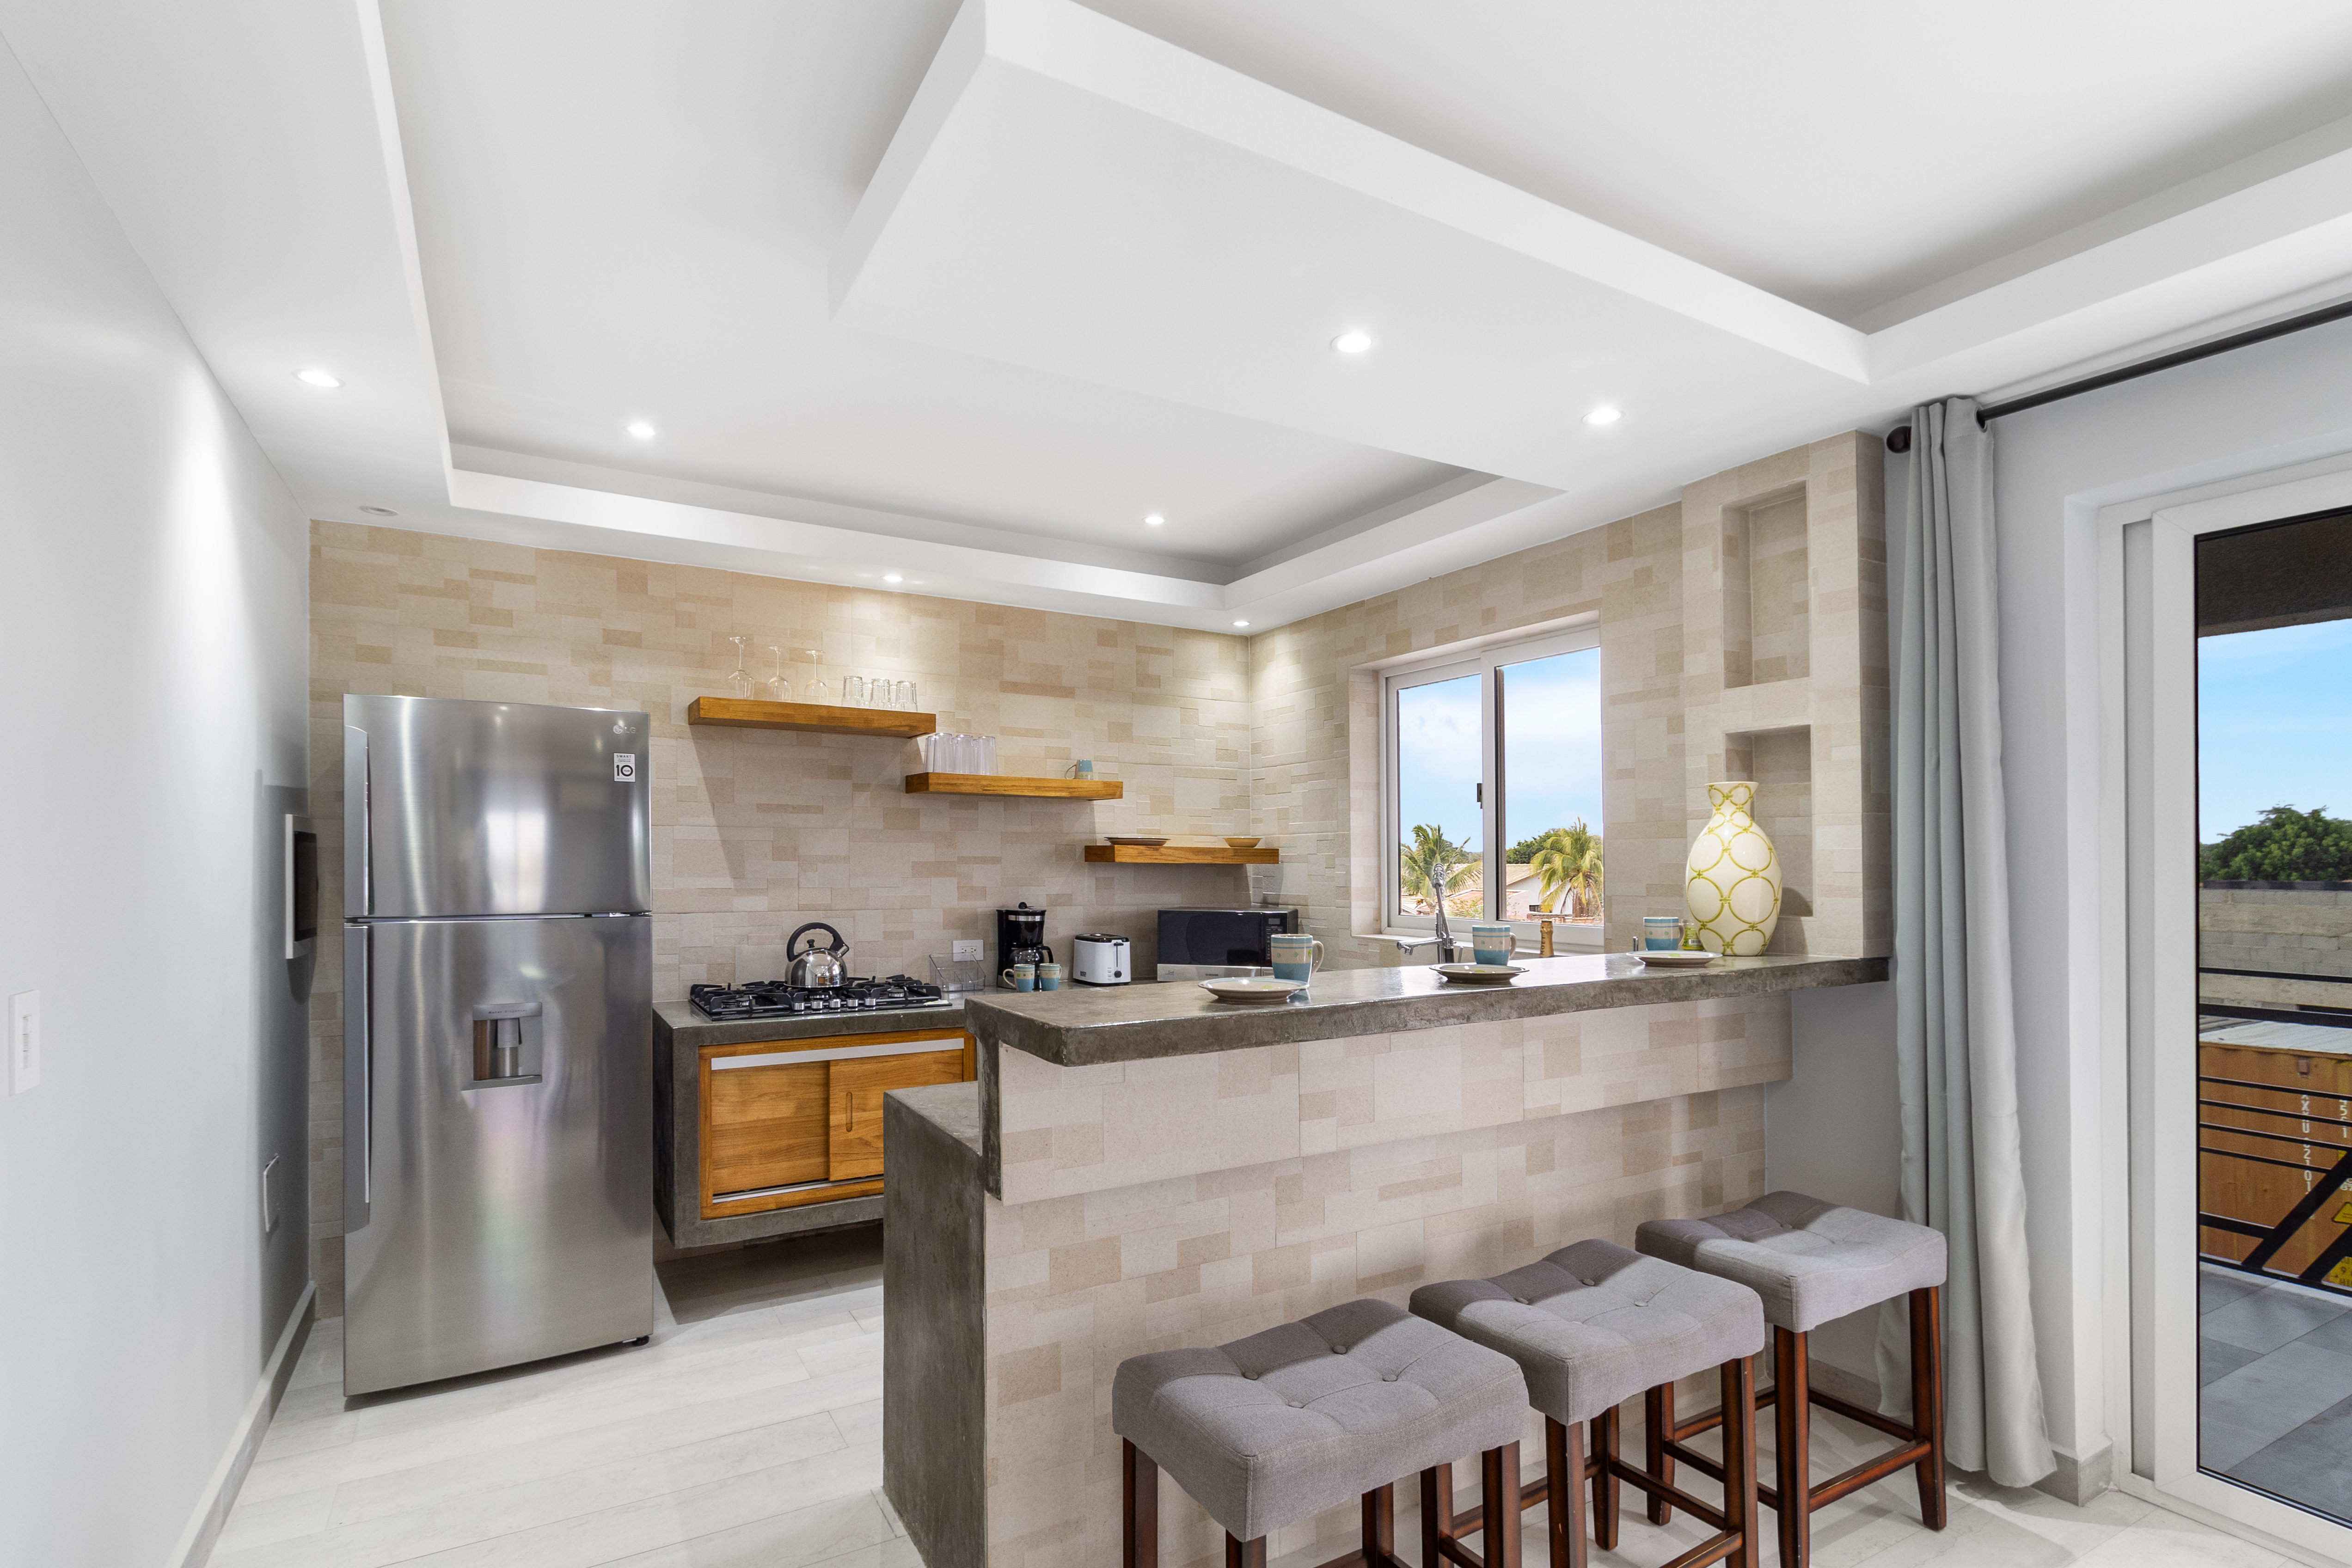 Beautiful kitchen of the apartment in Oranjestad Aruba - Modern kitchen with stainless steel appliances - Breakfast bar and high chairs - Thoughtful placement of kitchen essentials for easy access